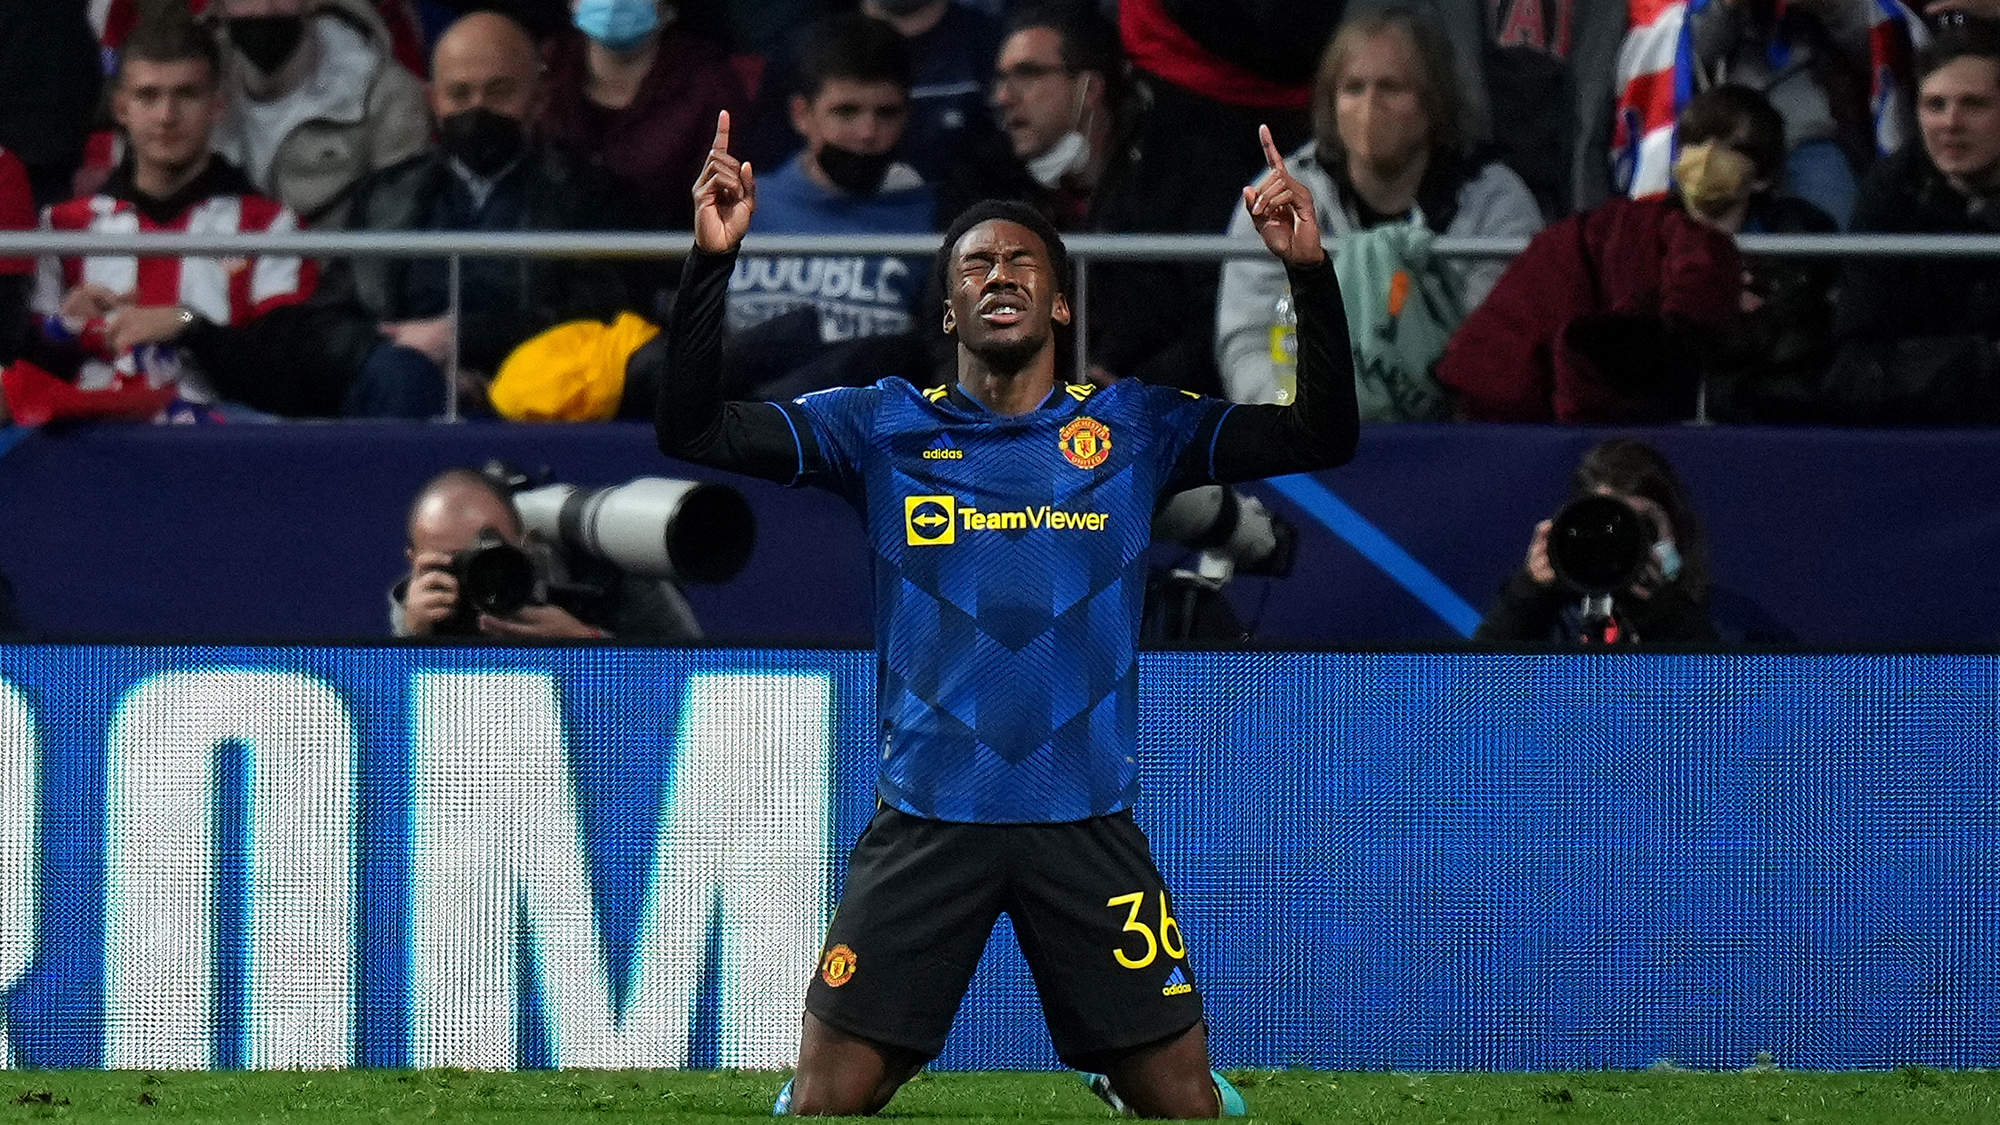 Anthony Elanga of Manchester United celebrates after scoring their team's first goal during the UEFA Champions League Round Of Sixteen Leg One match between Atletico Madrid and Manchester United at Wanda Metropolitano on February 23, 2022 in Madrid, Spain.